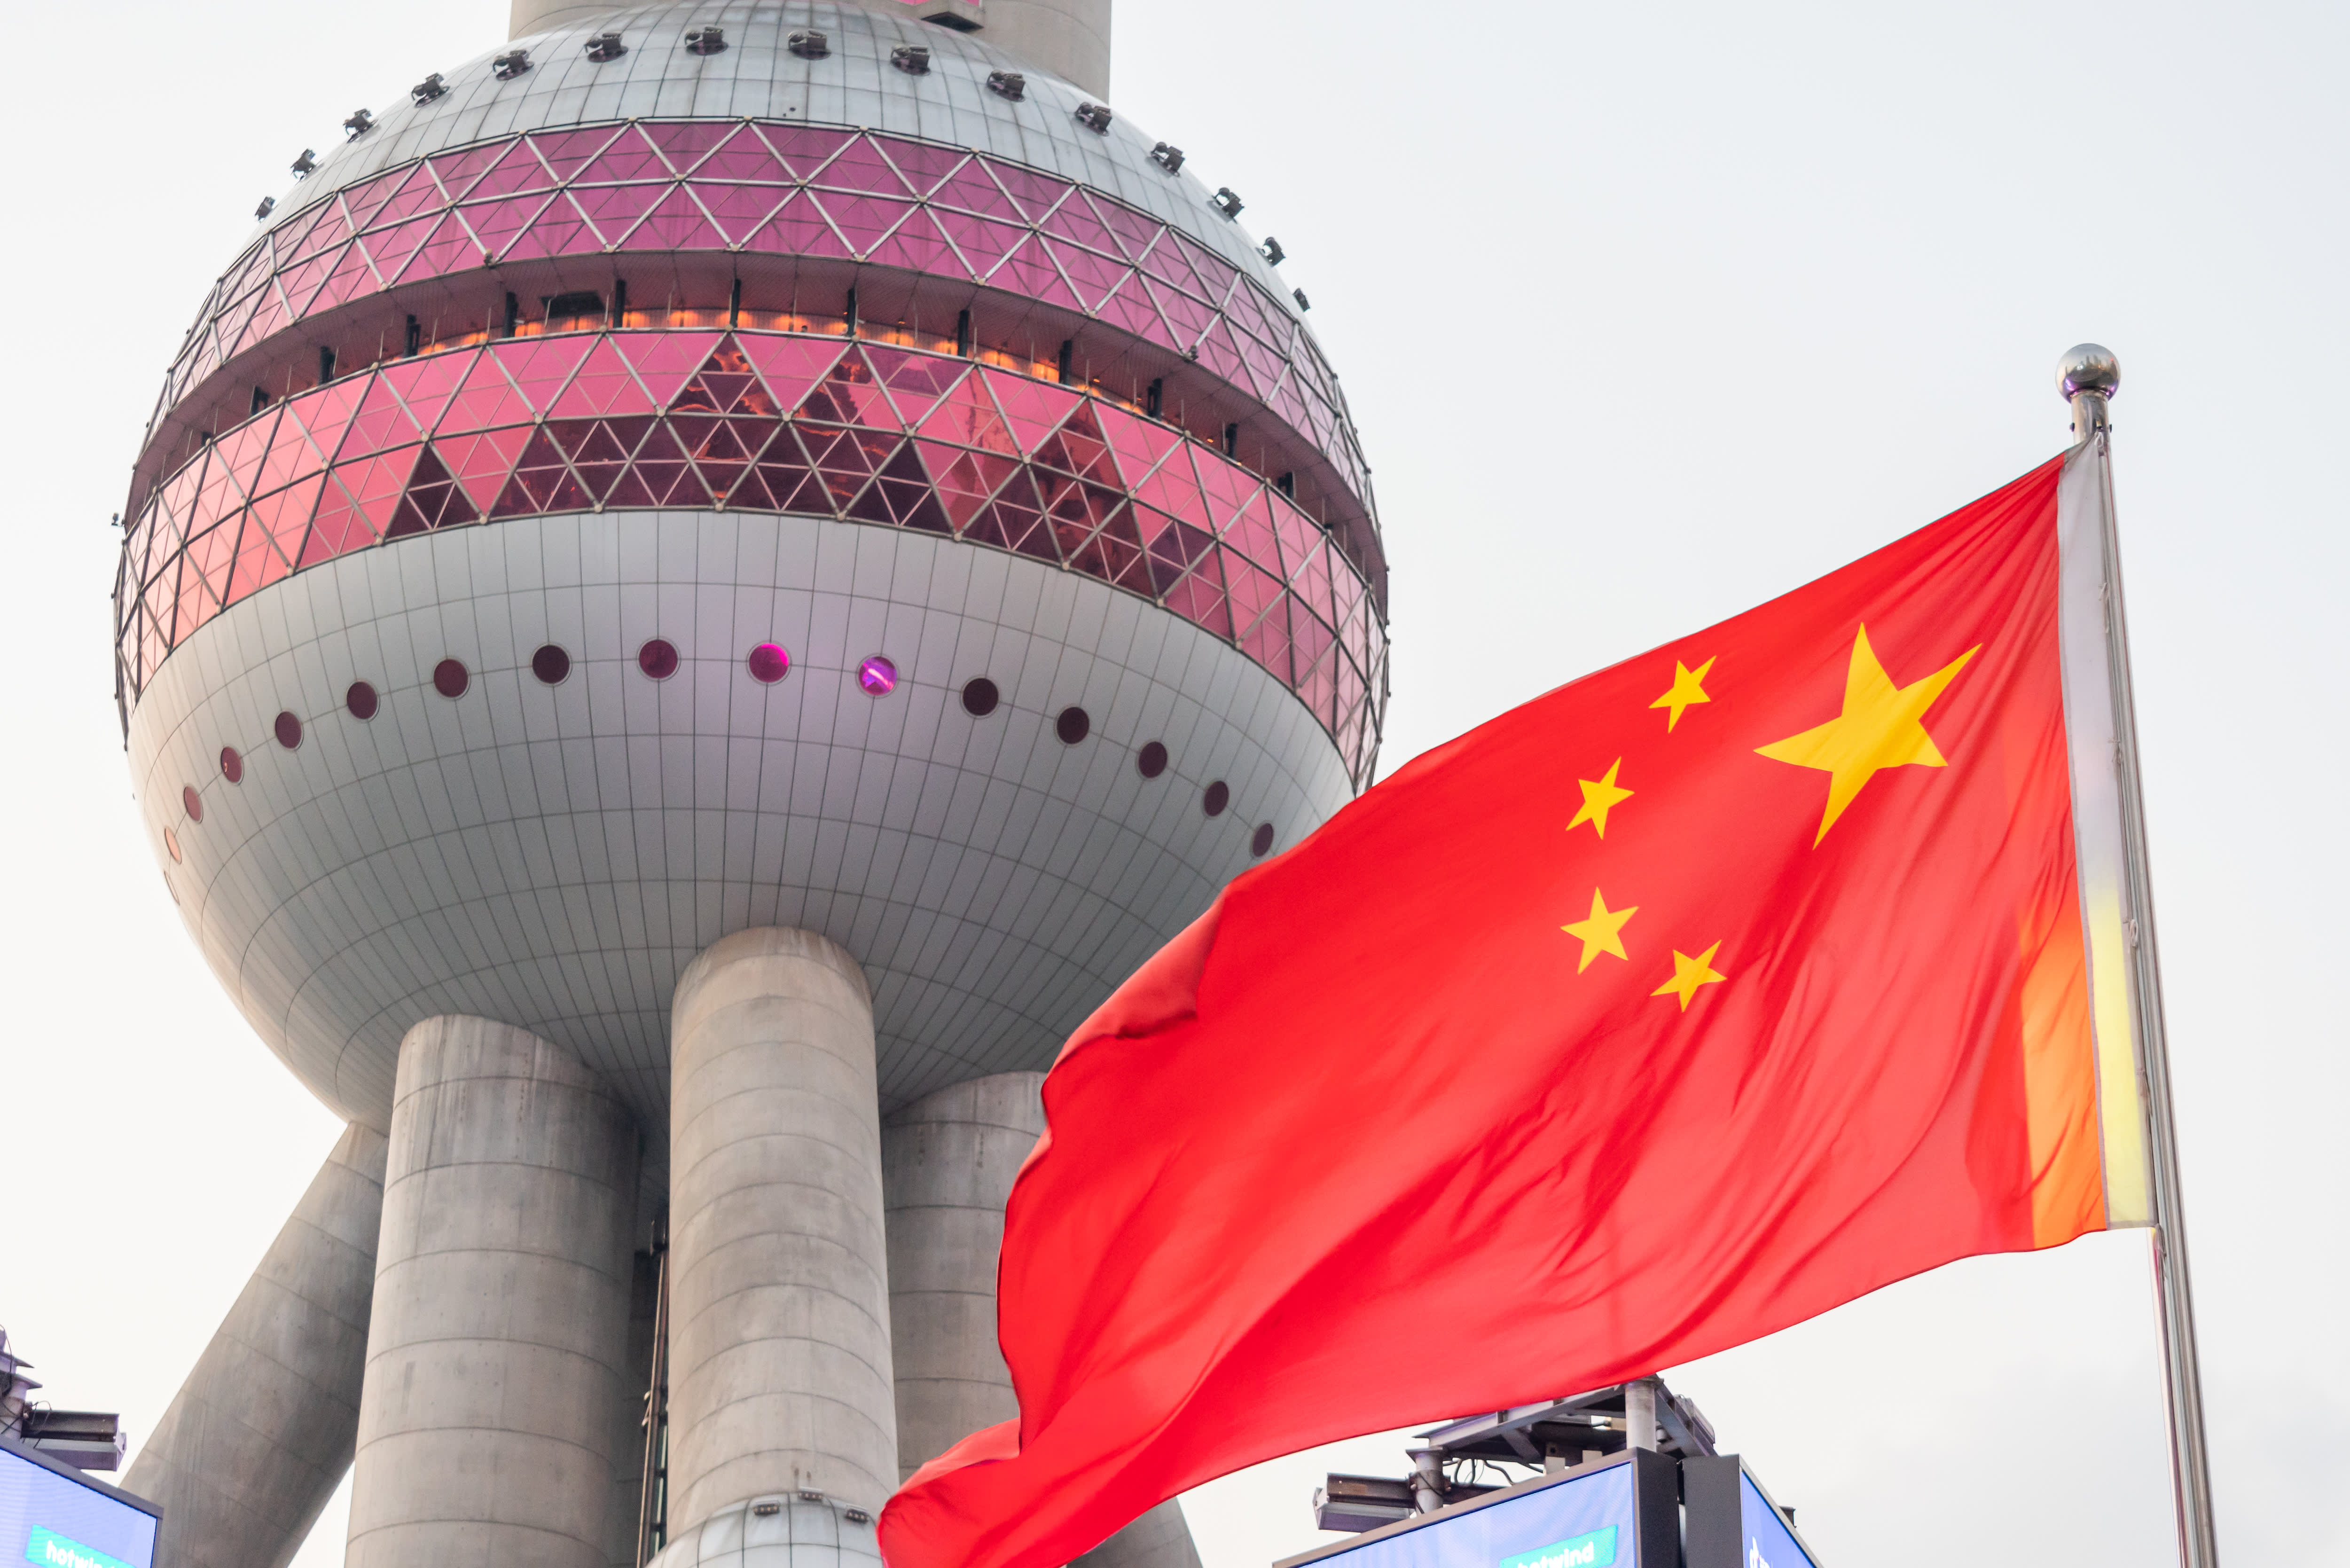 China has a good chance of doubling GDP by 2035, Bank of America says